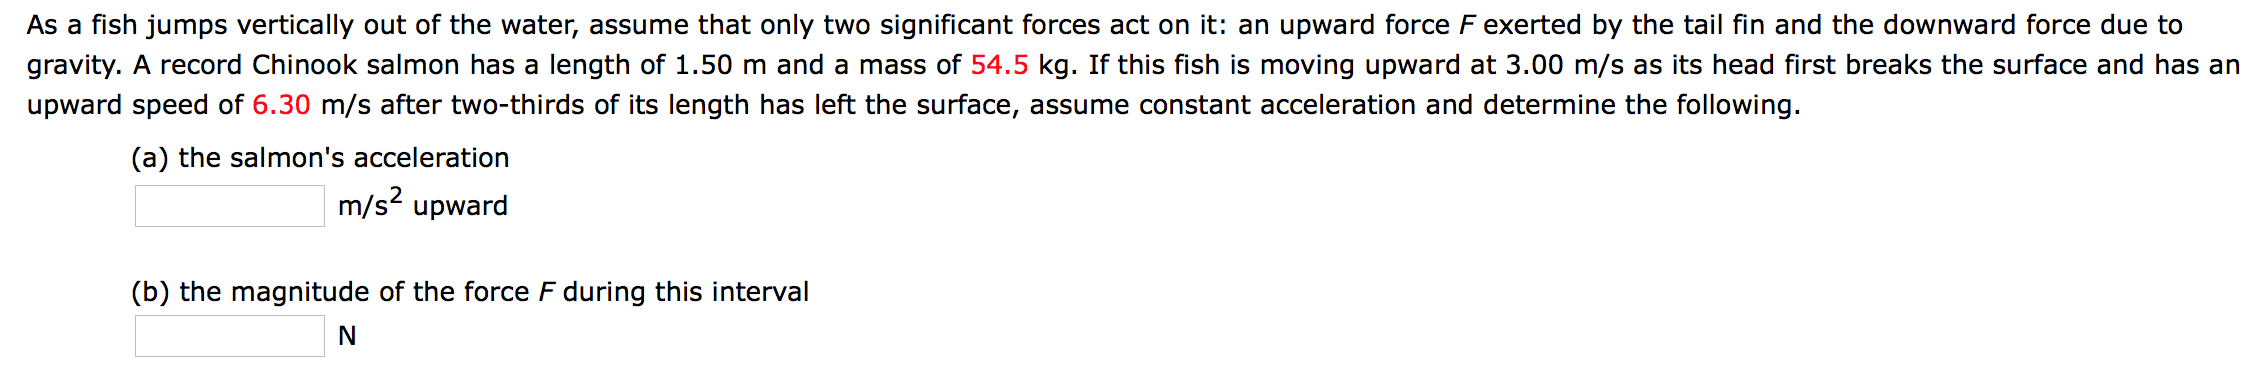 As a fish jumps vertically out of the water, assume that only two significant forces act on it: an upward force F exerted by the tail fin and the downward force due to
gravity. A record Chinook salmon has a length of 1.50 m and a mass of 54.5 kg. If this fish is moving upward at 3.00 m/s as its head first breaks the surface and has an
upward speed of 6.30 m/s after two-thirds of its length has left the surface, assume constant acceleration and determine the following.
(a) the salmon's acceleration
m/s2 upward
(b) the magnitude of the force F during this interval
